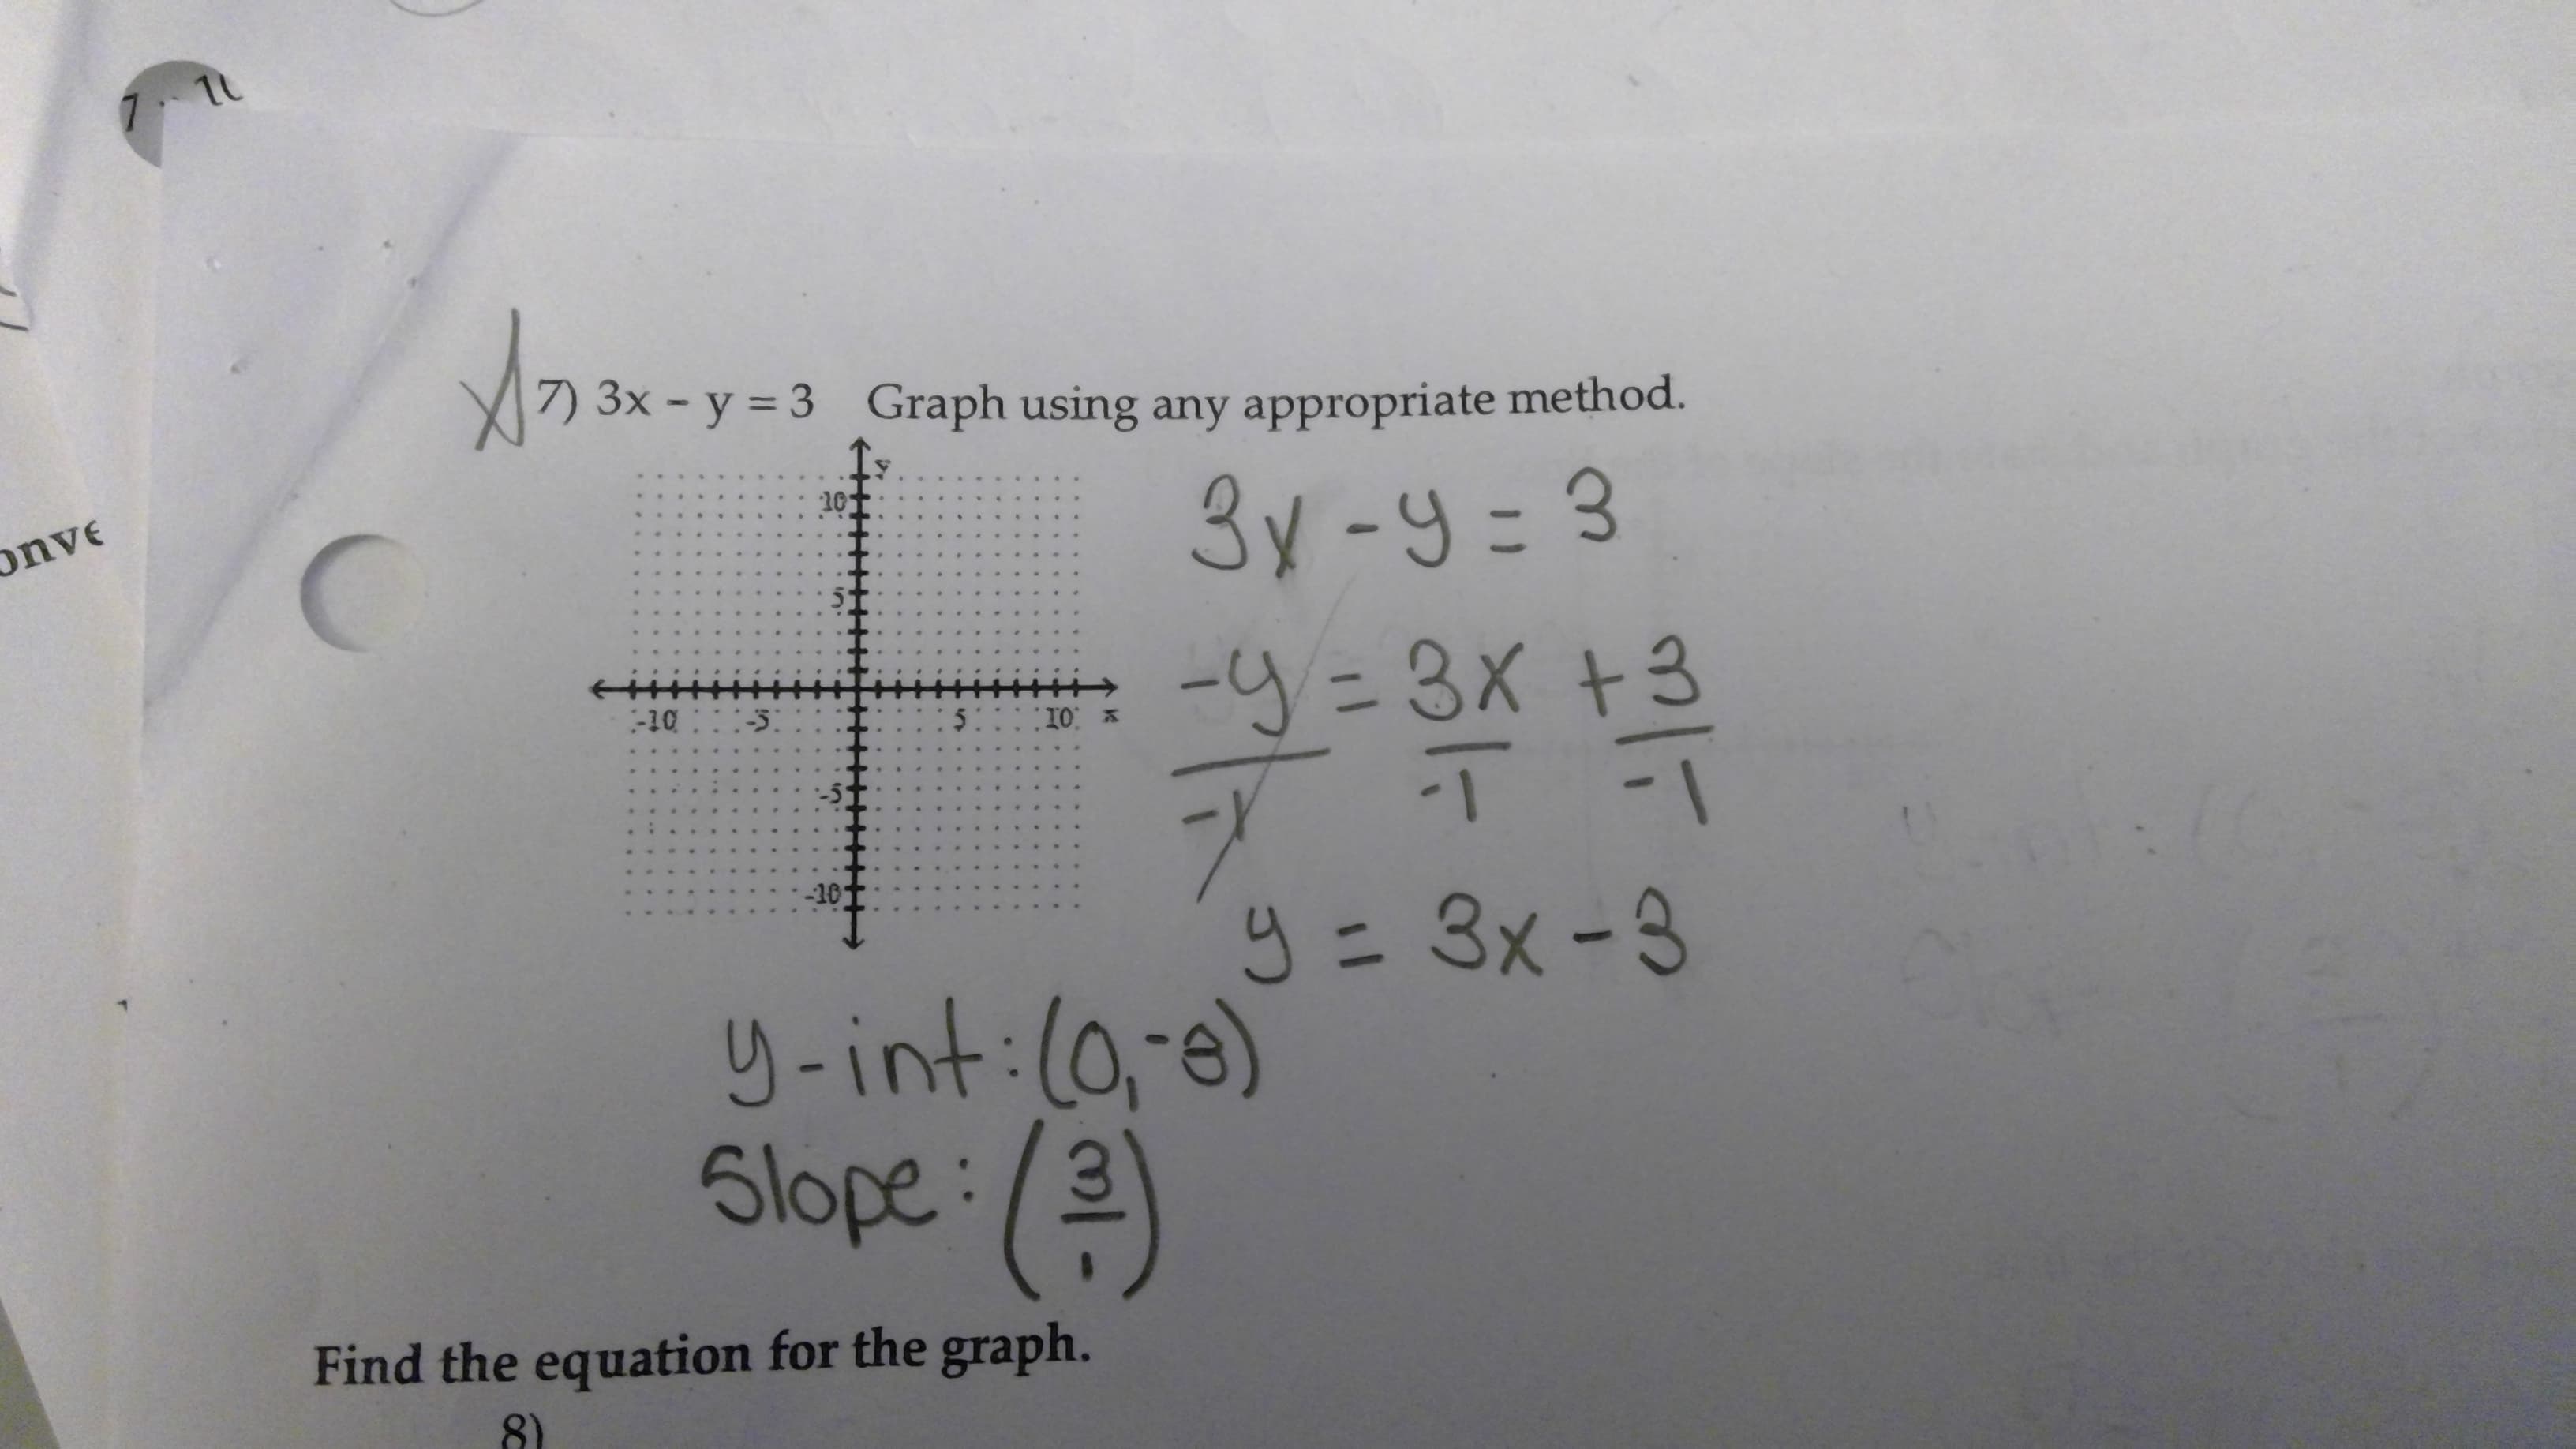 7) 3x -y 3 Graph using any appropriate method.
10
Find the equation for the graph.
8)
